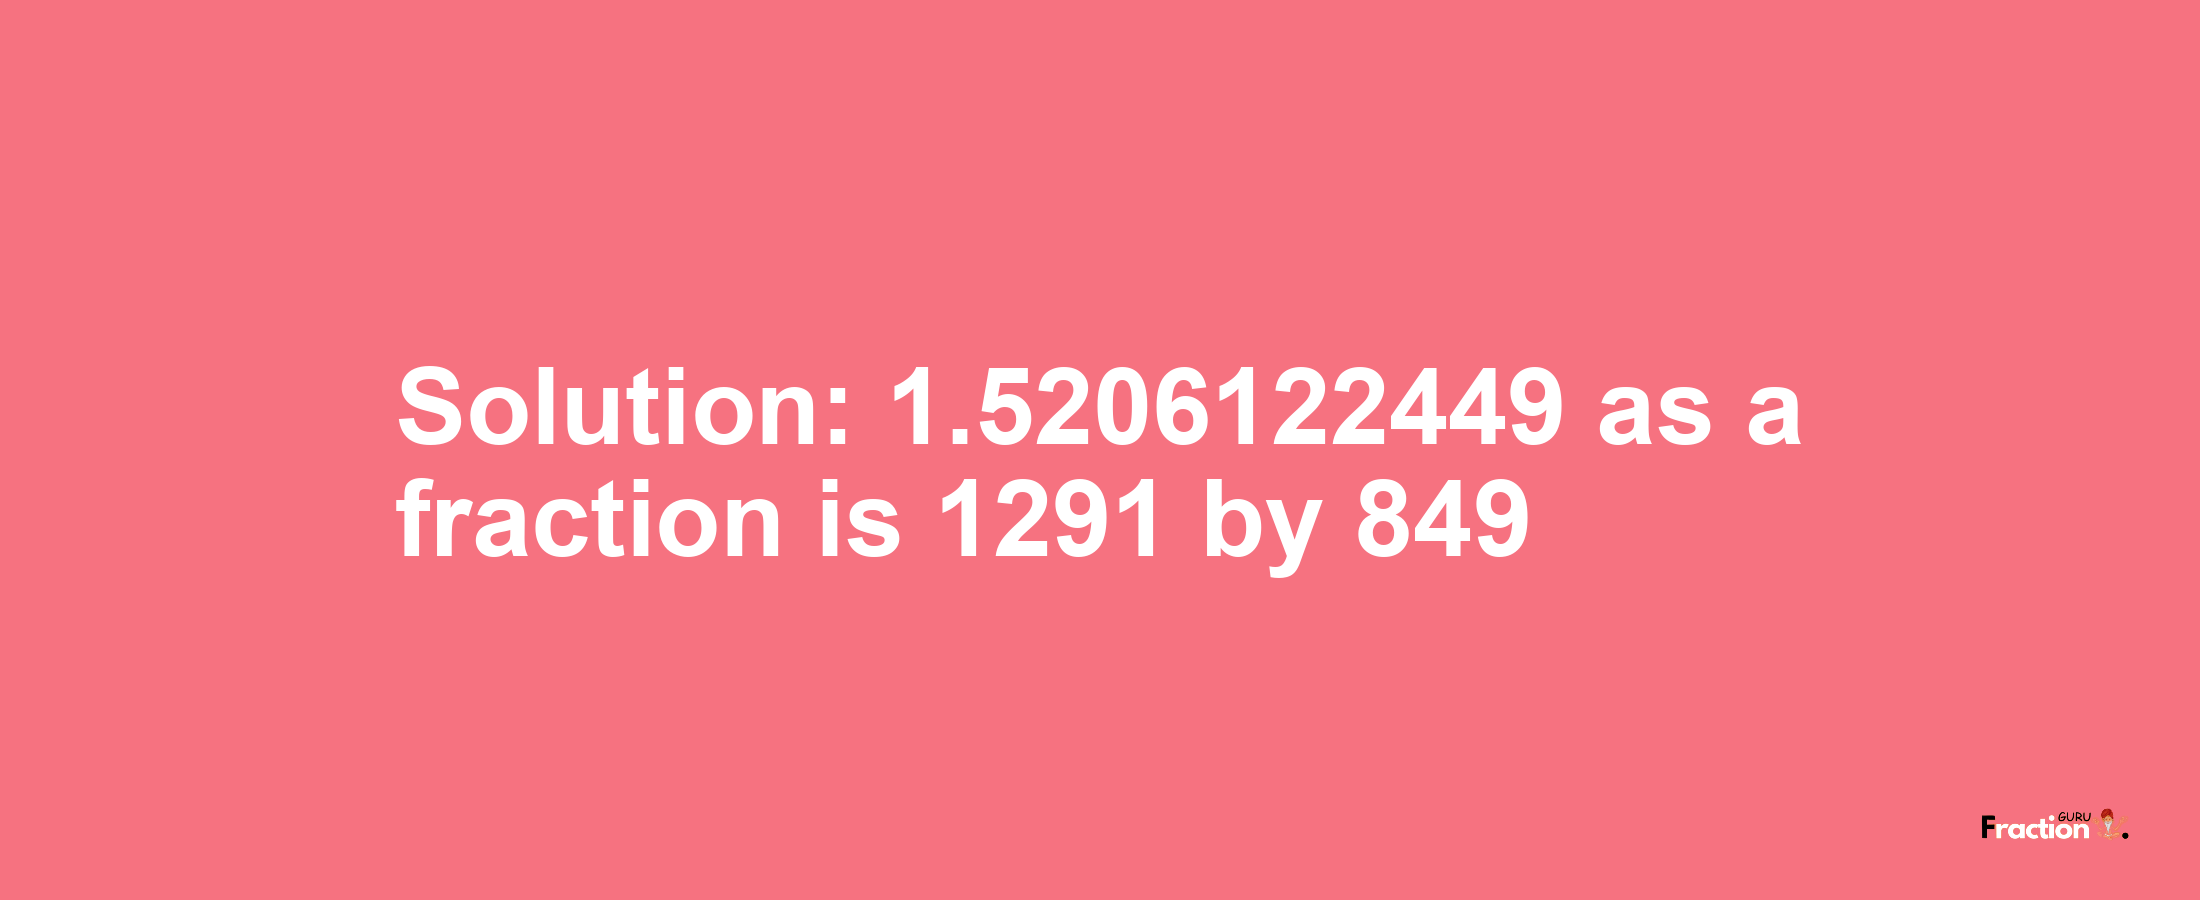 Solution:1.5206122449 as a fraction is 1291/849